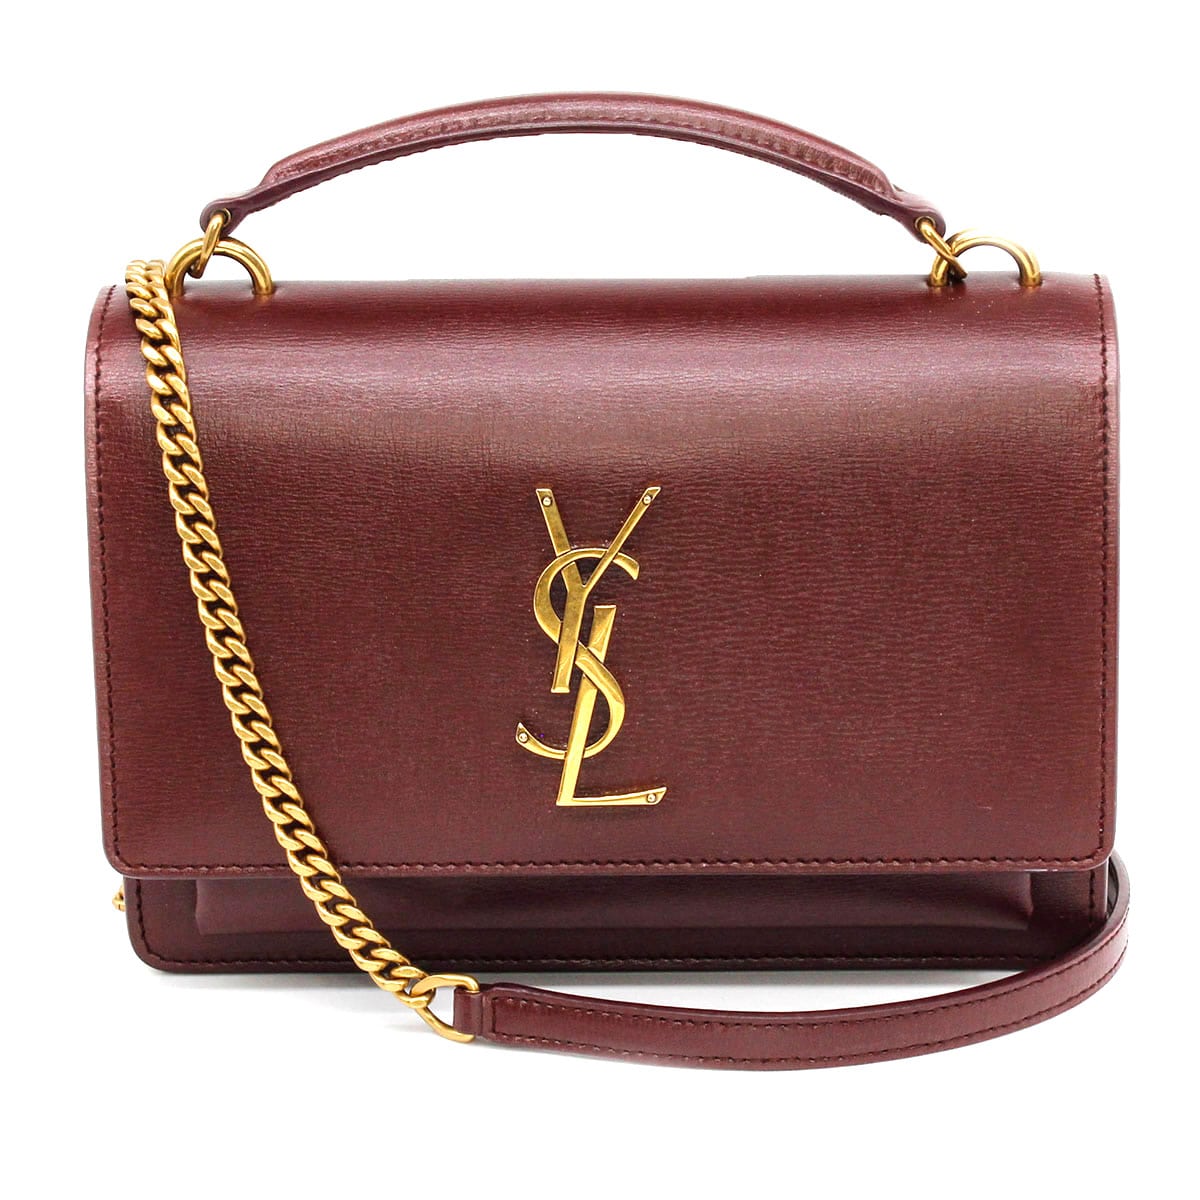 ysl sunset bag in maroon with gold chain